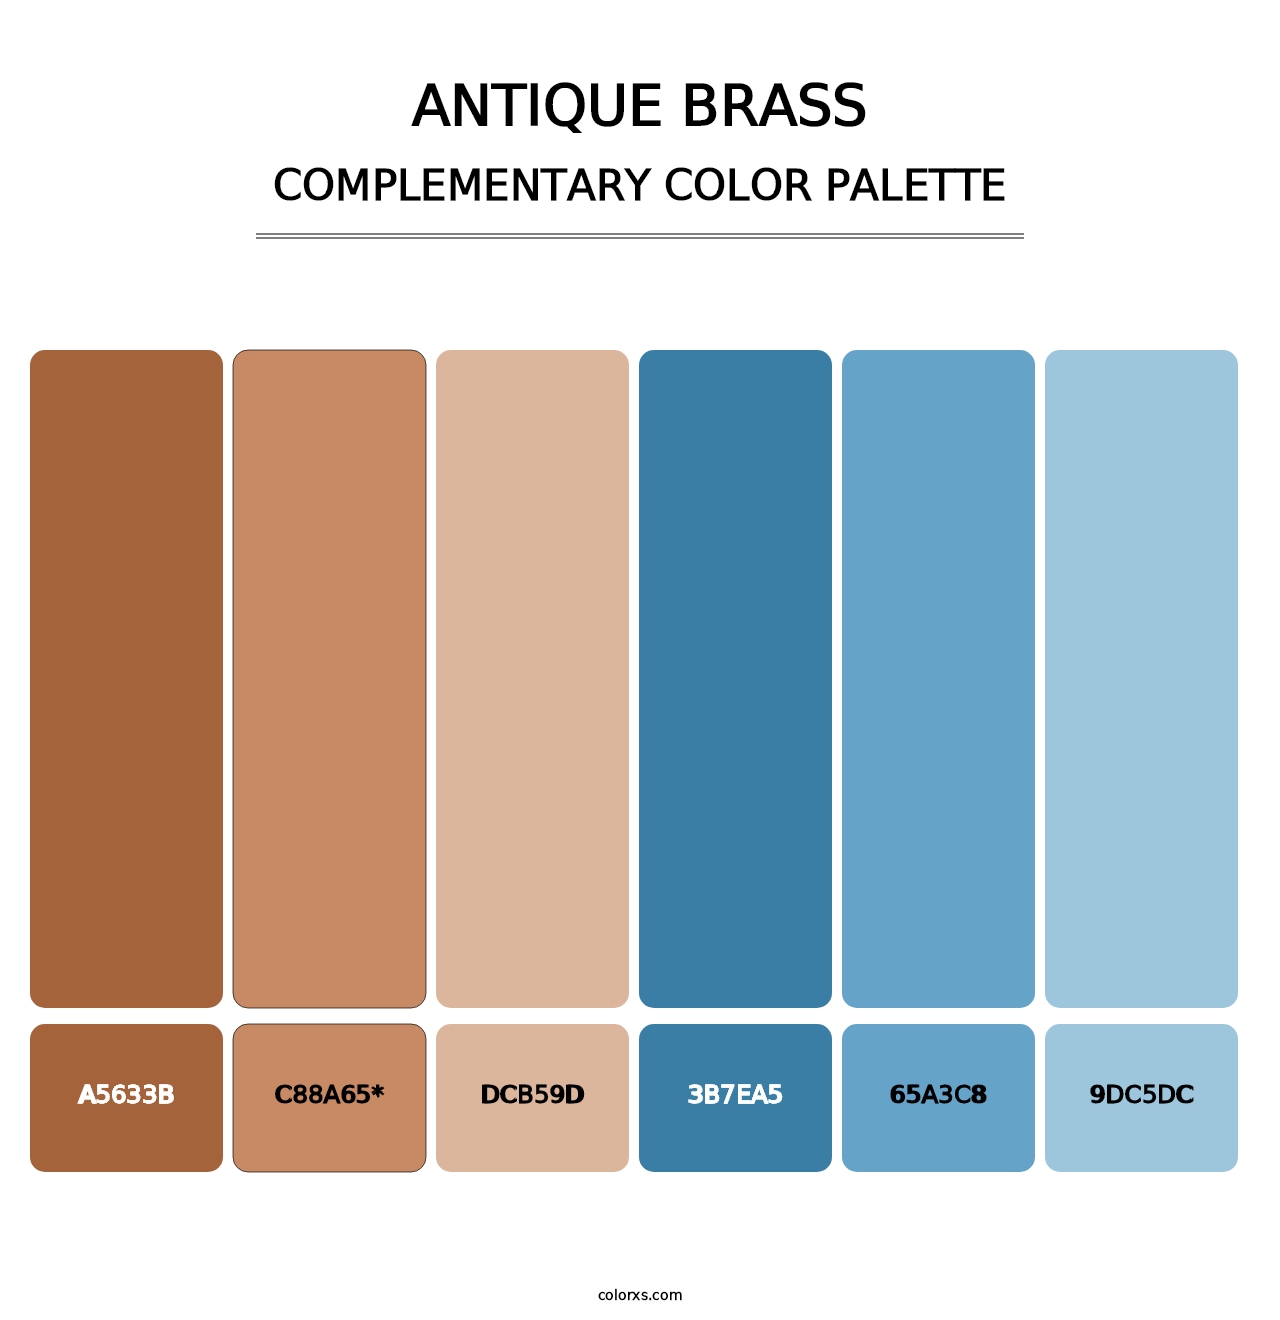 Antique Brass - Complementary Color Palette